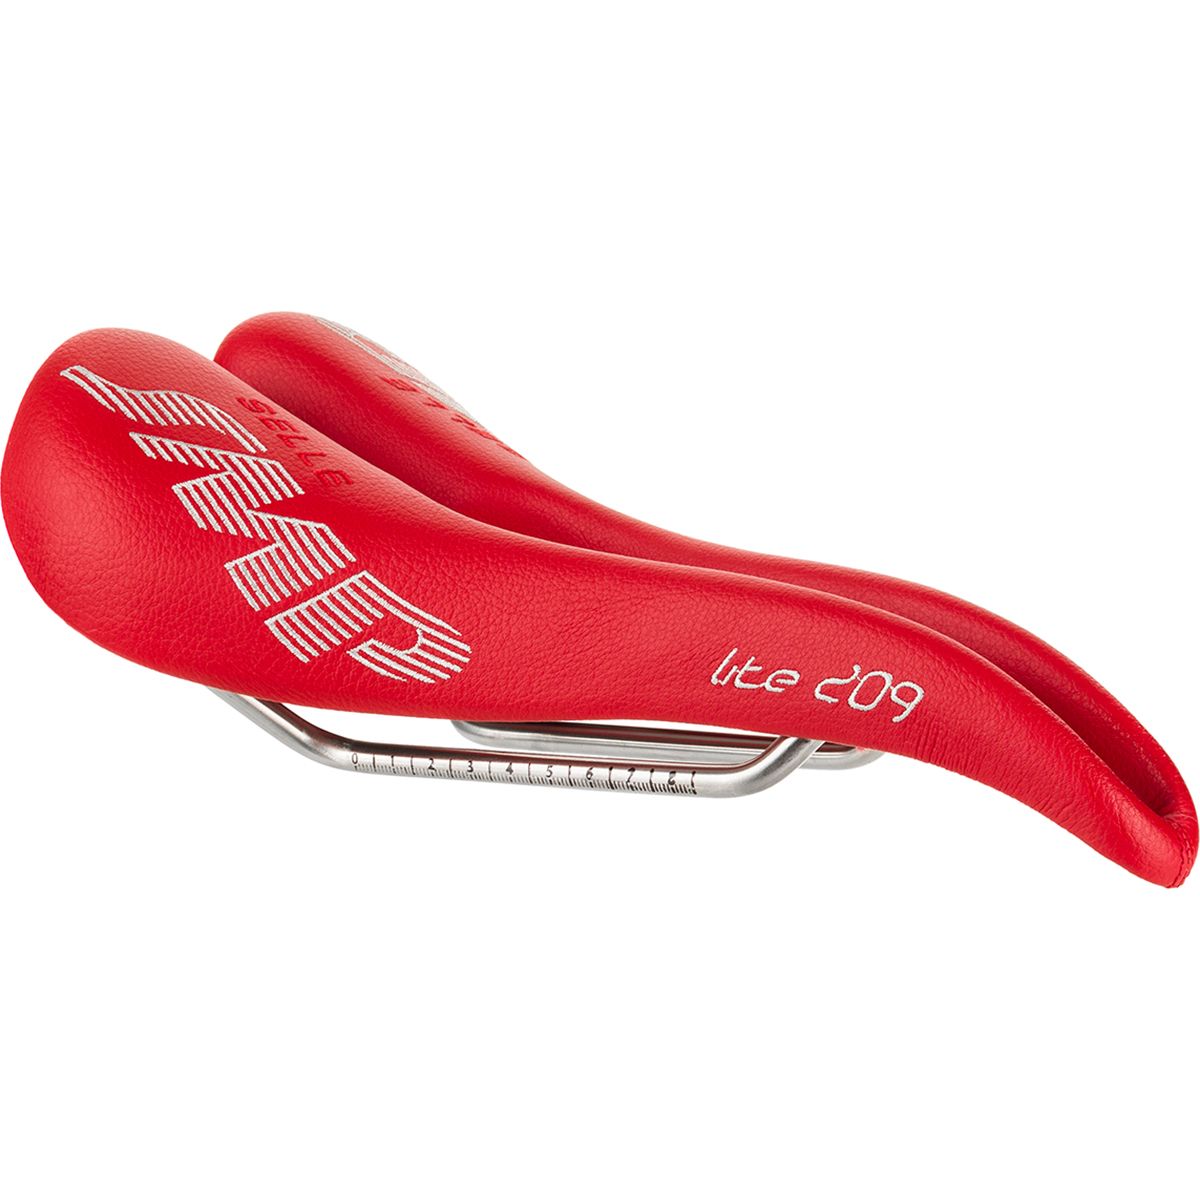 Selle SMP Lite 209 Saddle Red, 139mm